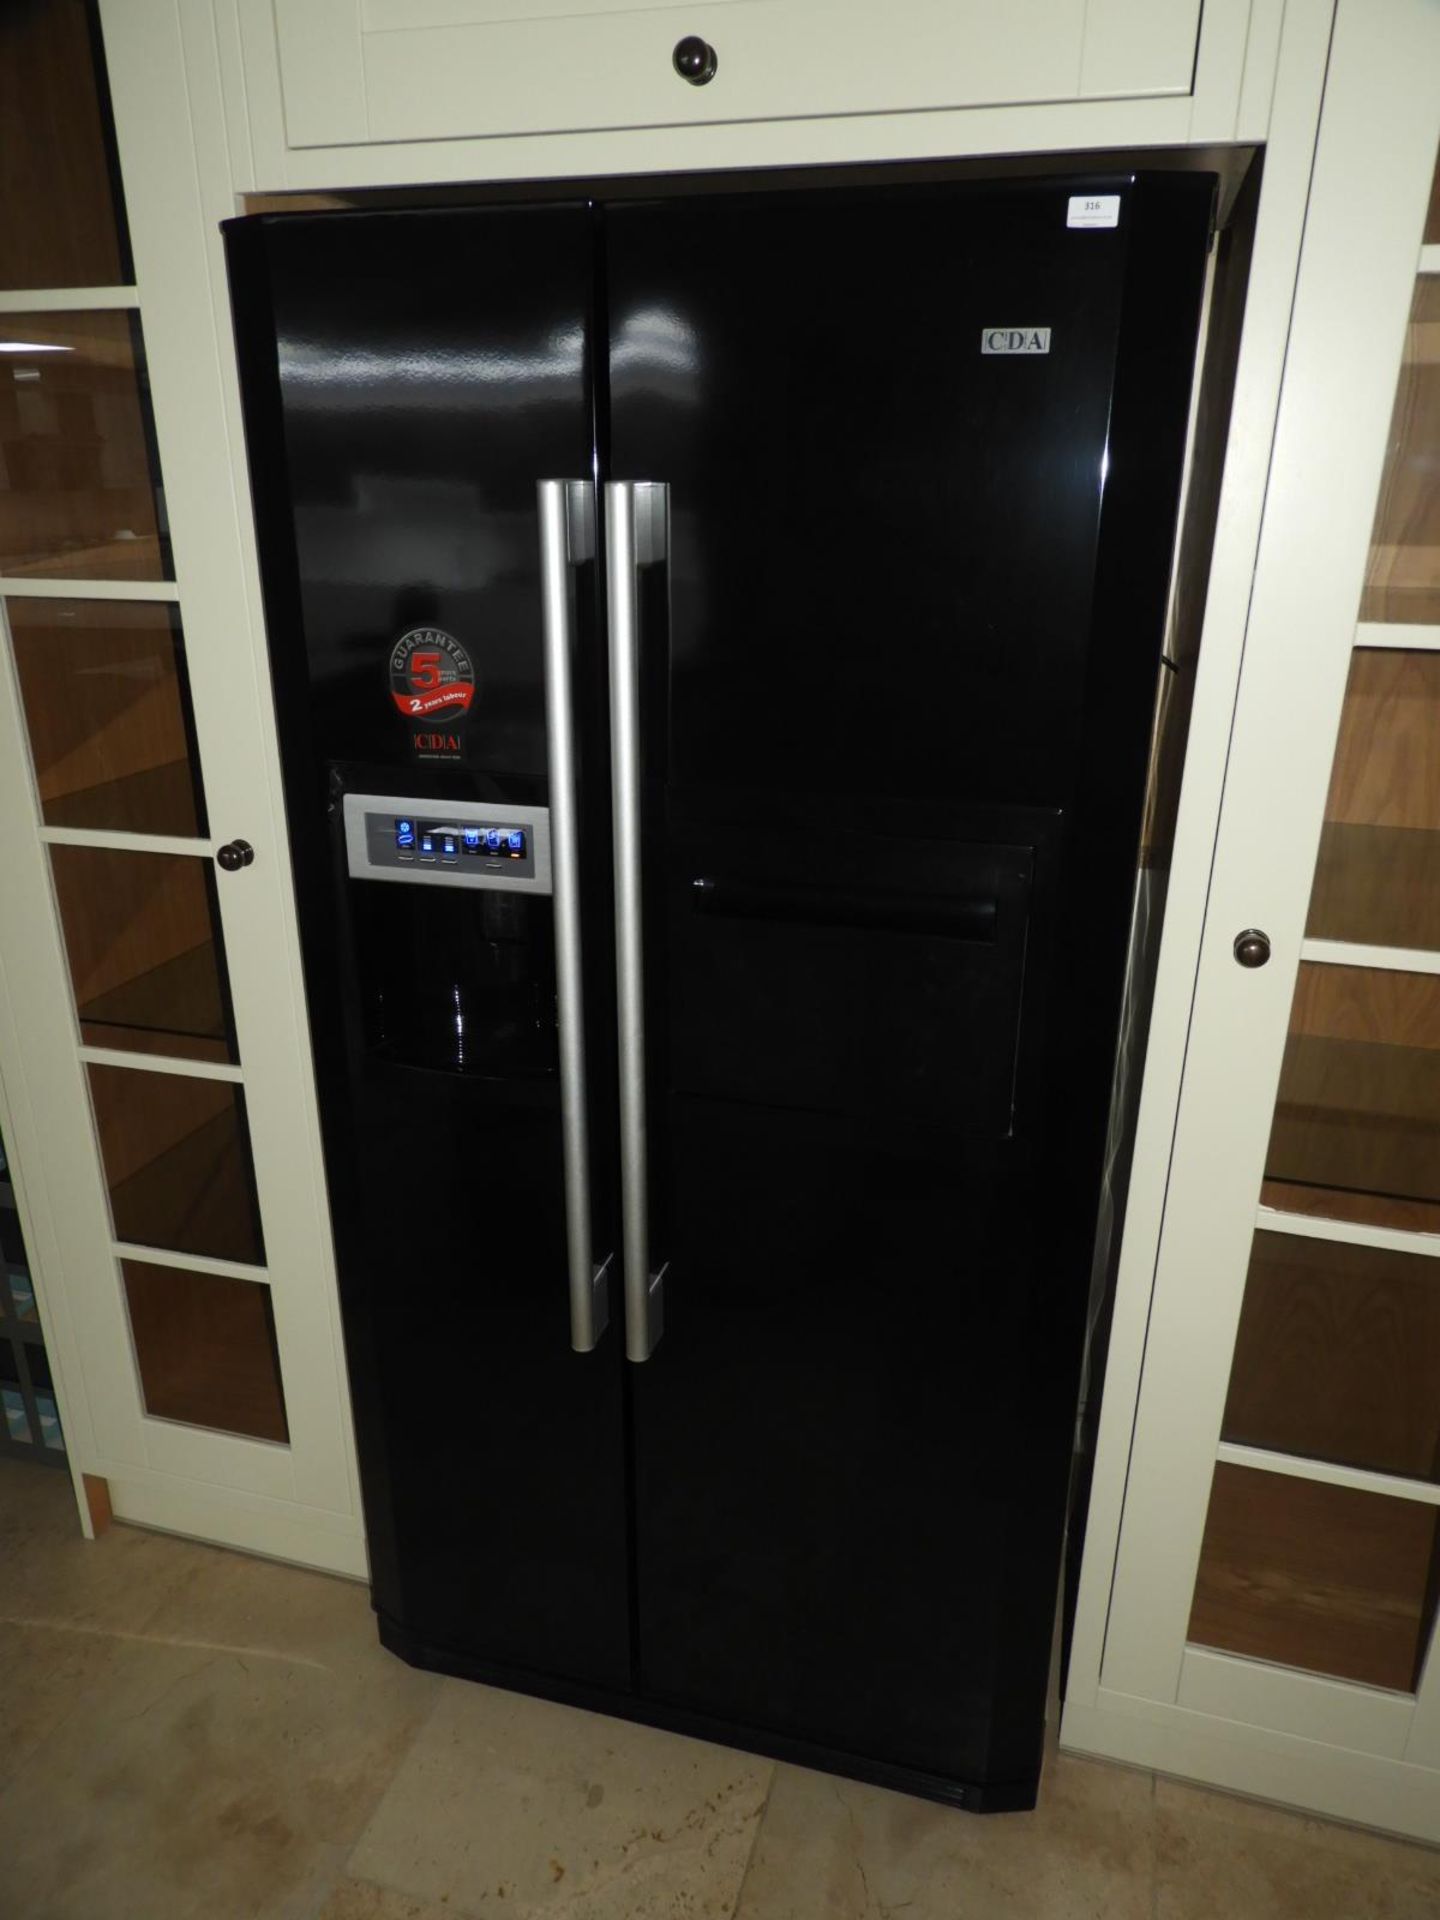 *CDA High Gloss Black American Style Refrigerator with Water & Ice Dispenser Model: PC65BL